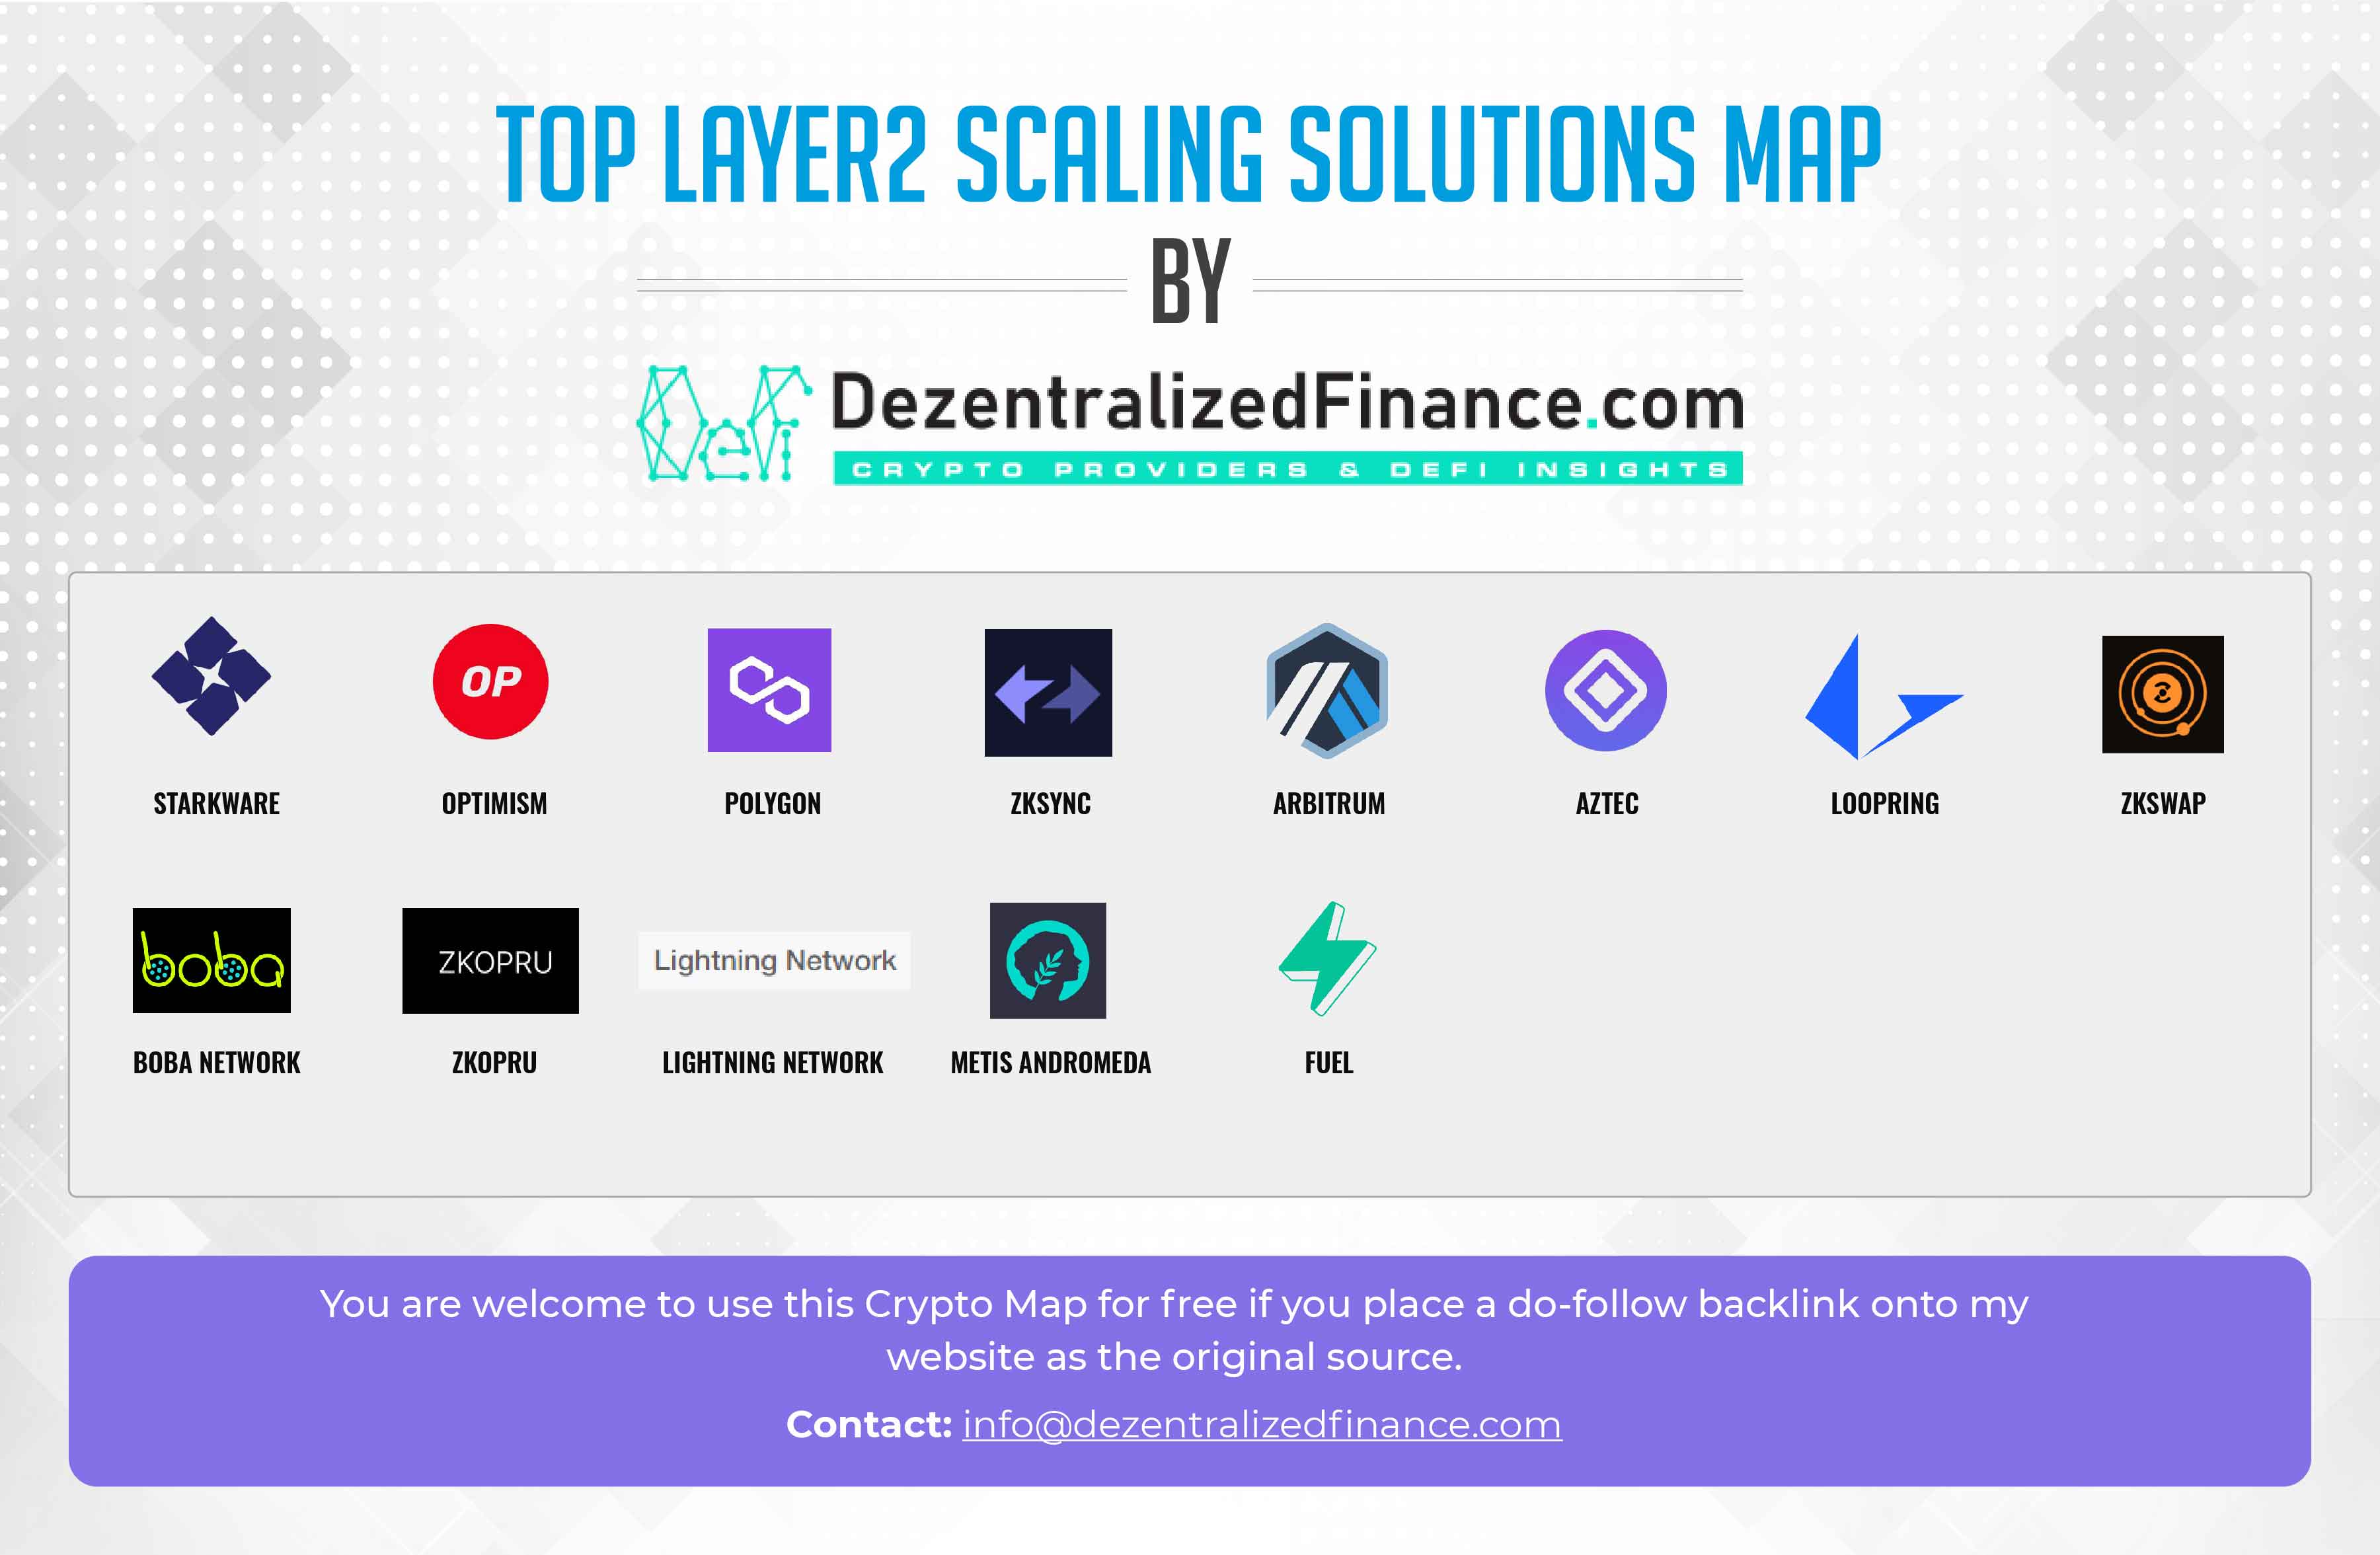 Top Layer2 Scaling solutions 2022